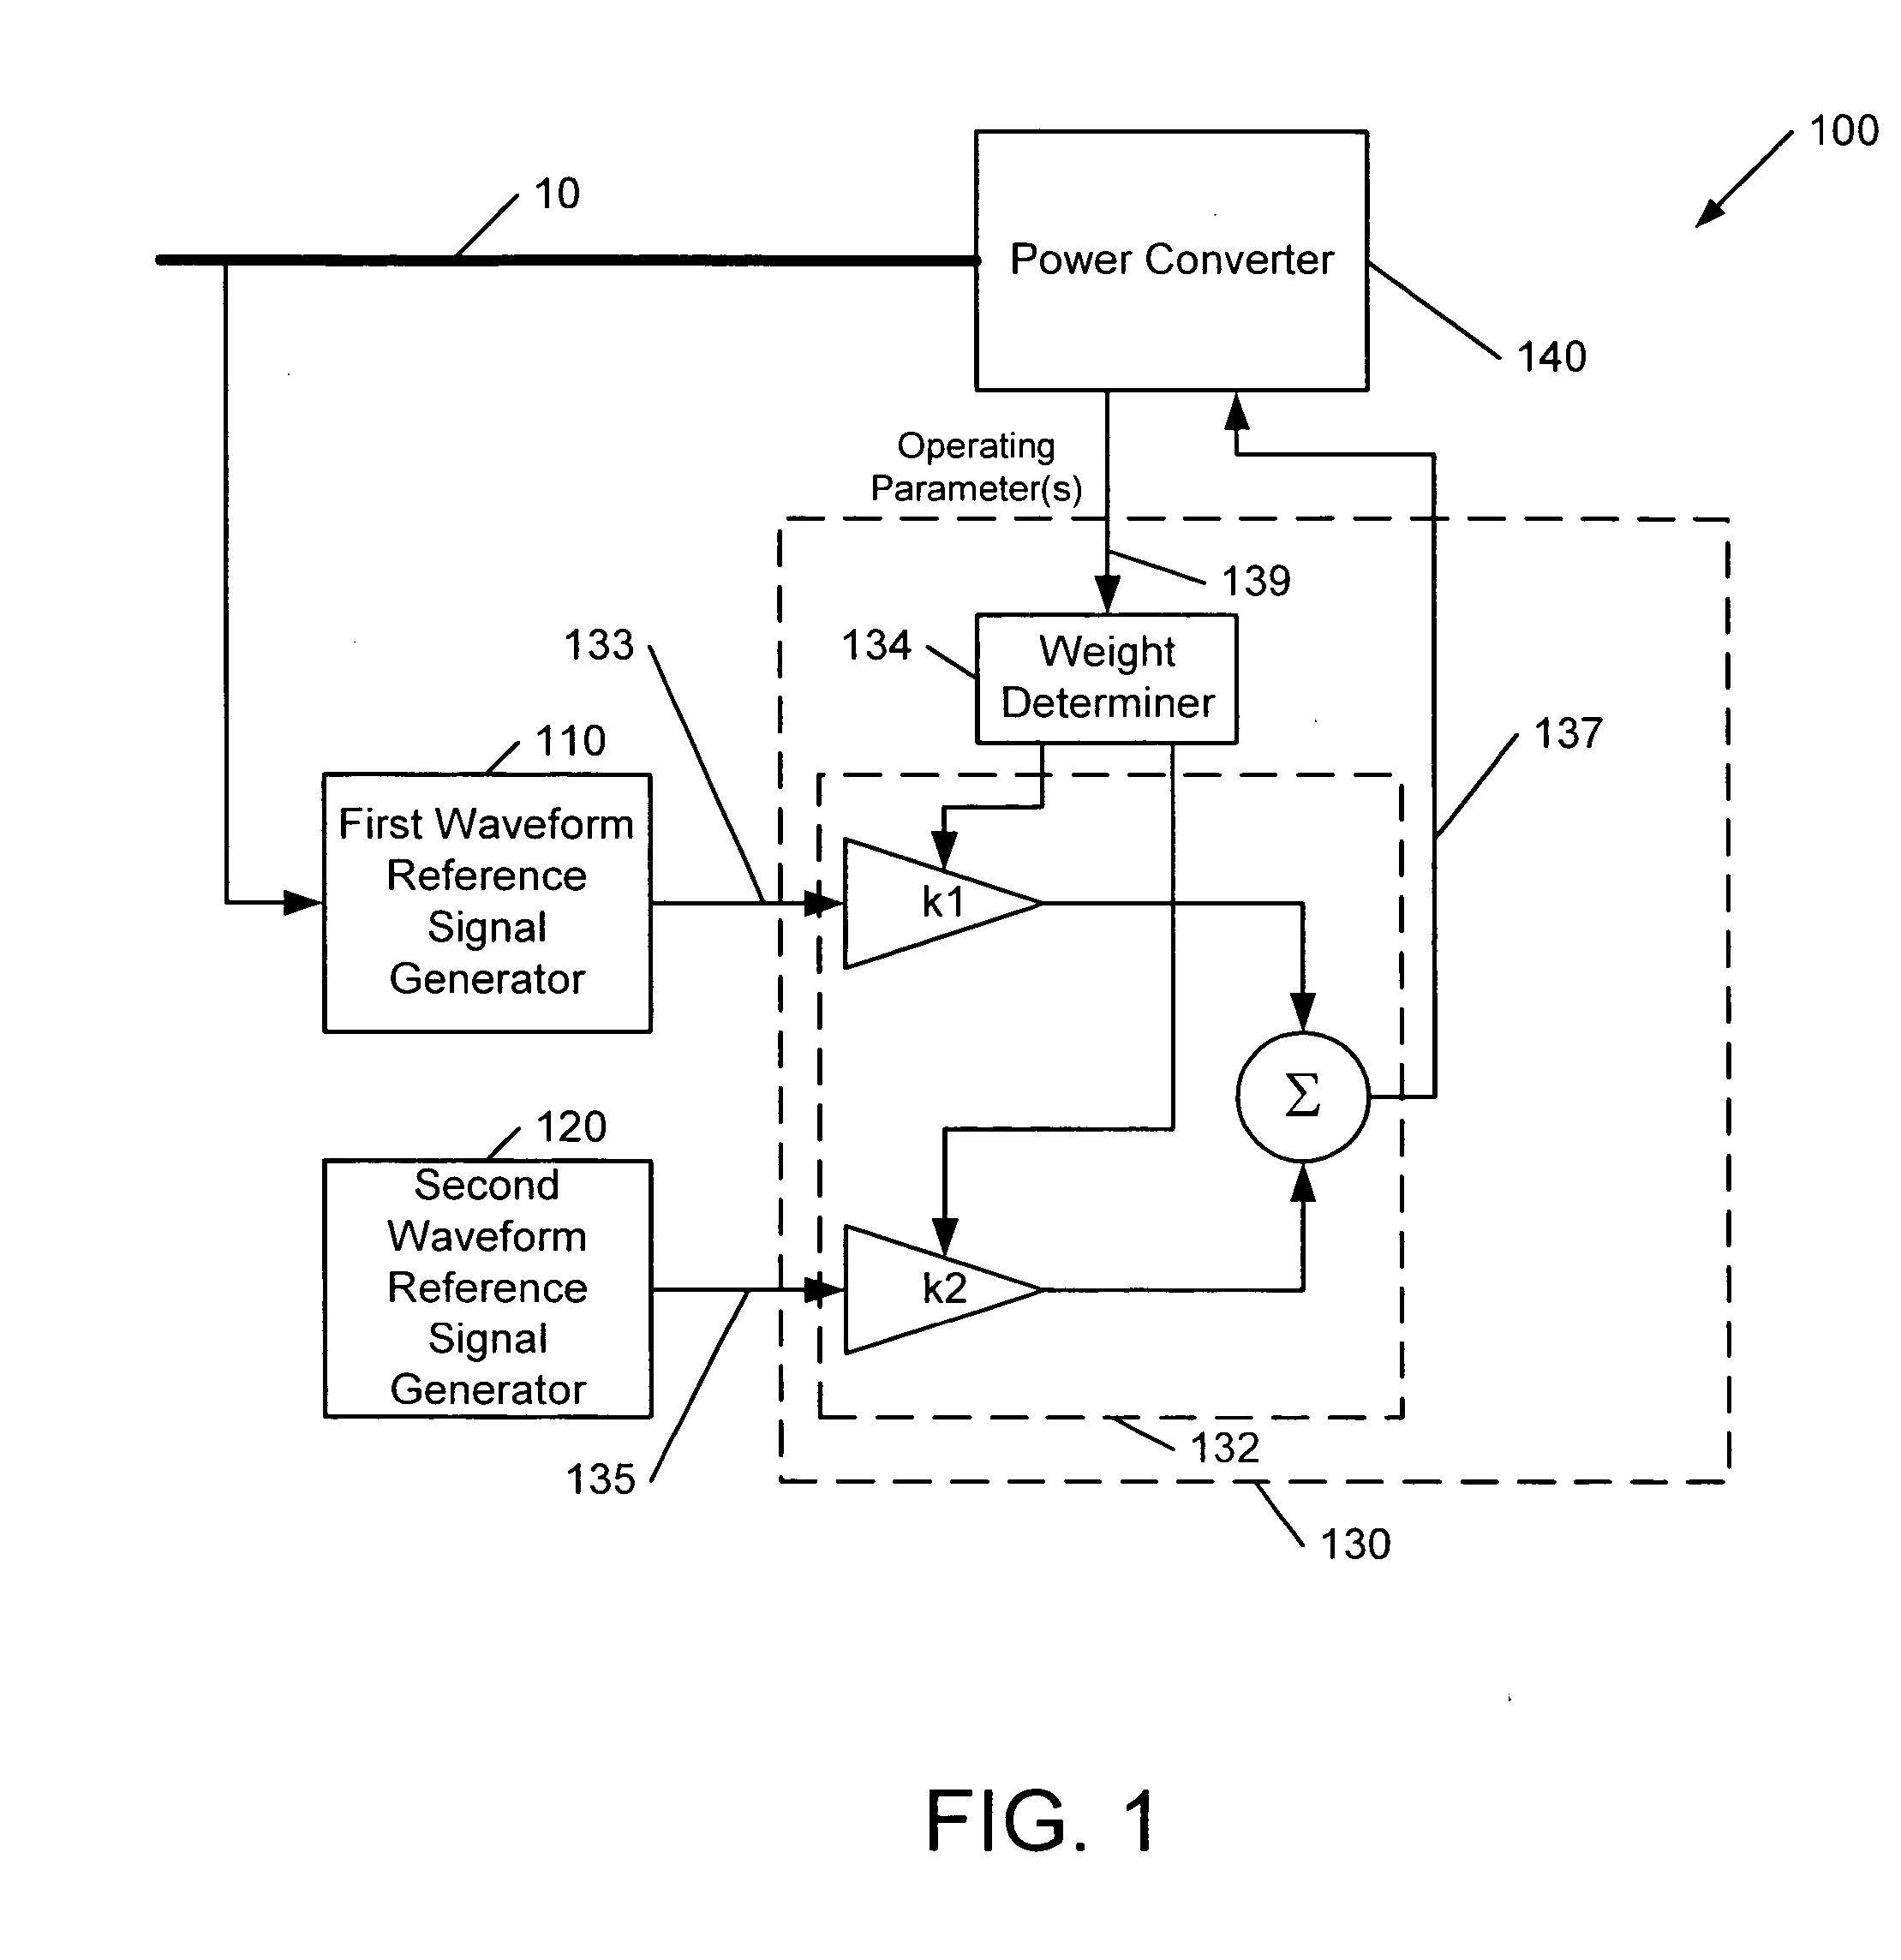 Power conversion apparatus and methods using an adaptive waveform reference